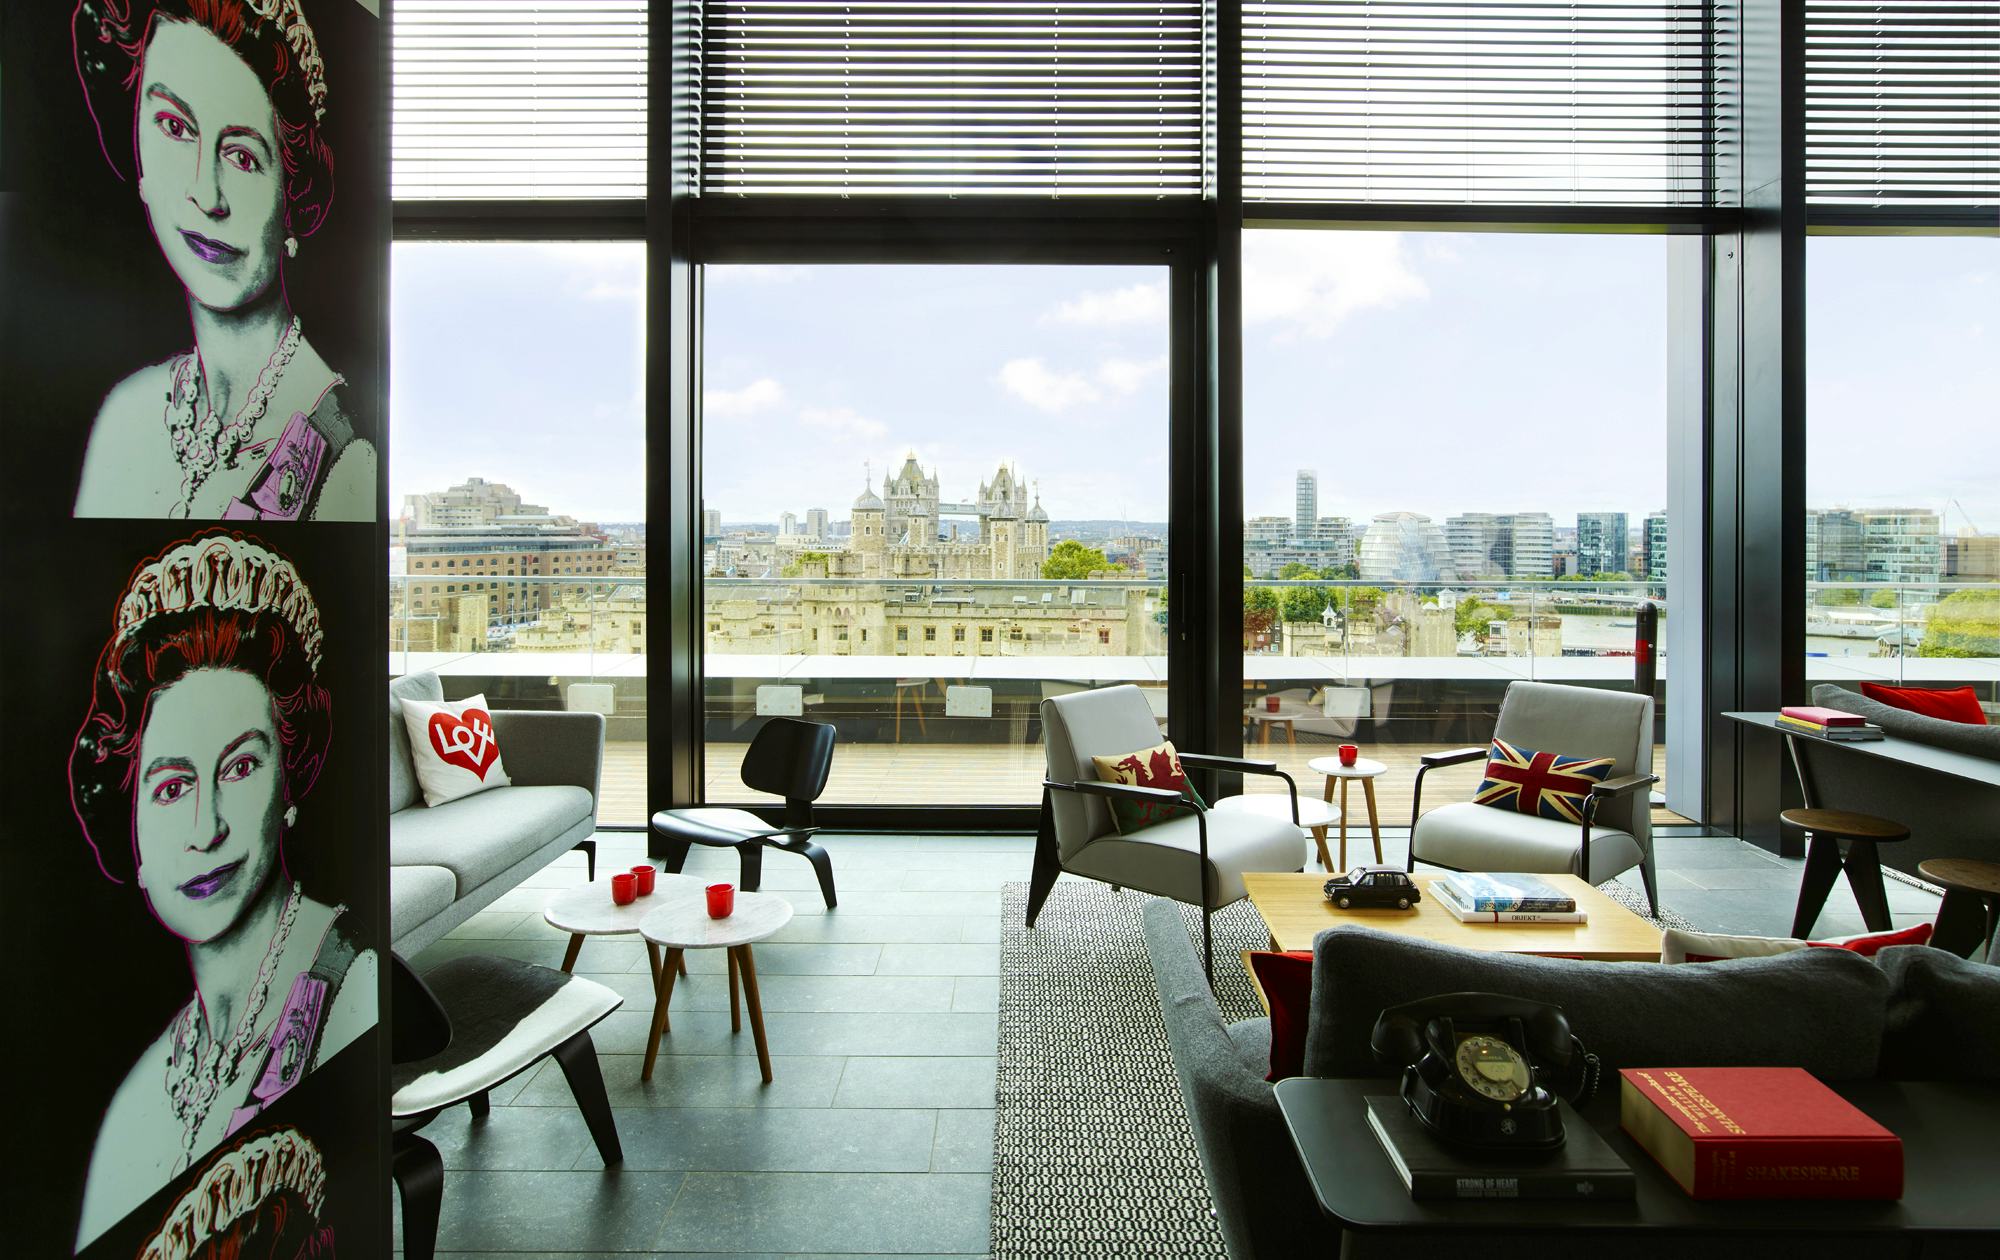 CitizenM Tower of London hotels arty designer venue hire events group bookings lounge